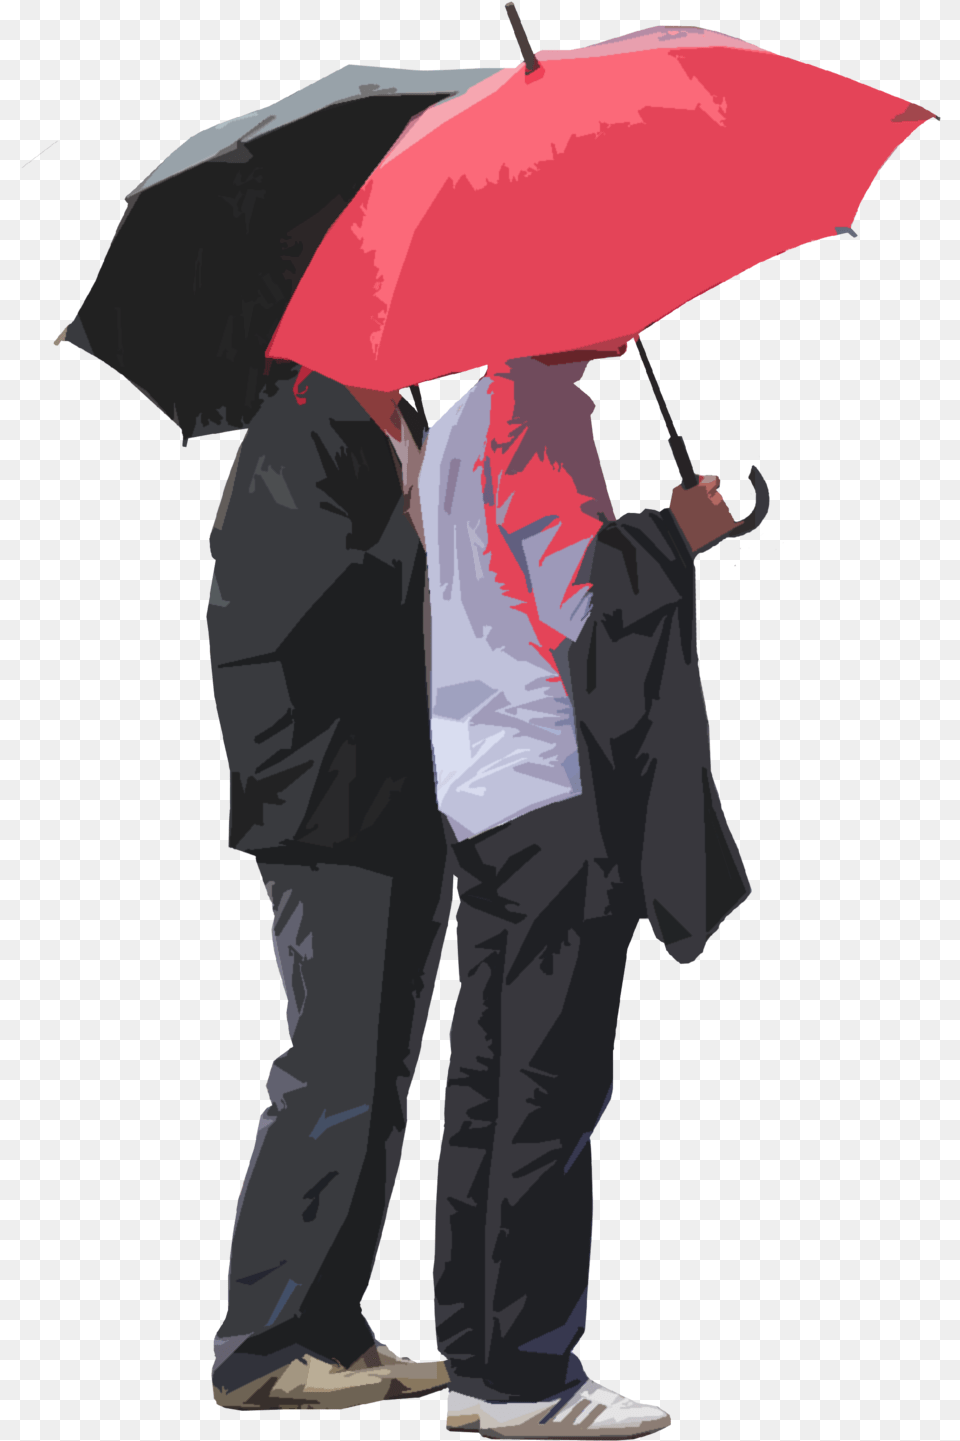 People With Umbrellas U0026 Umbrellaspng People In Rain, Clothing, Coat, Canopy, Adult Png